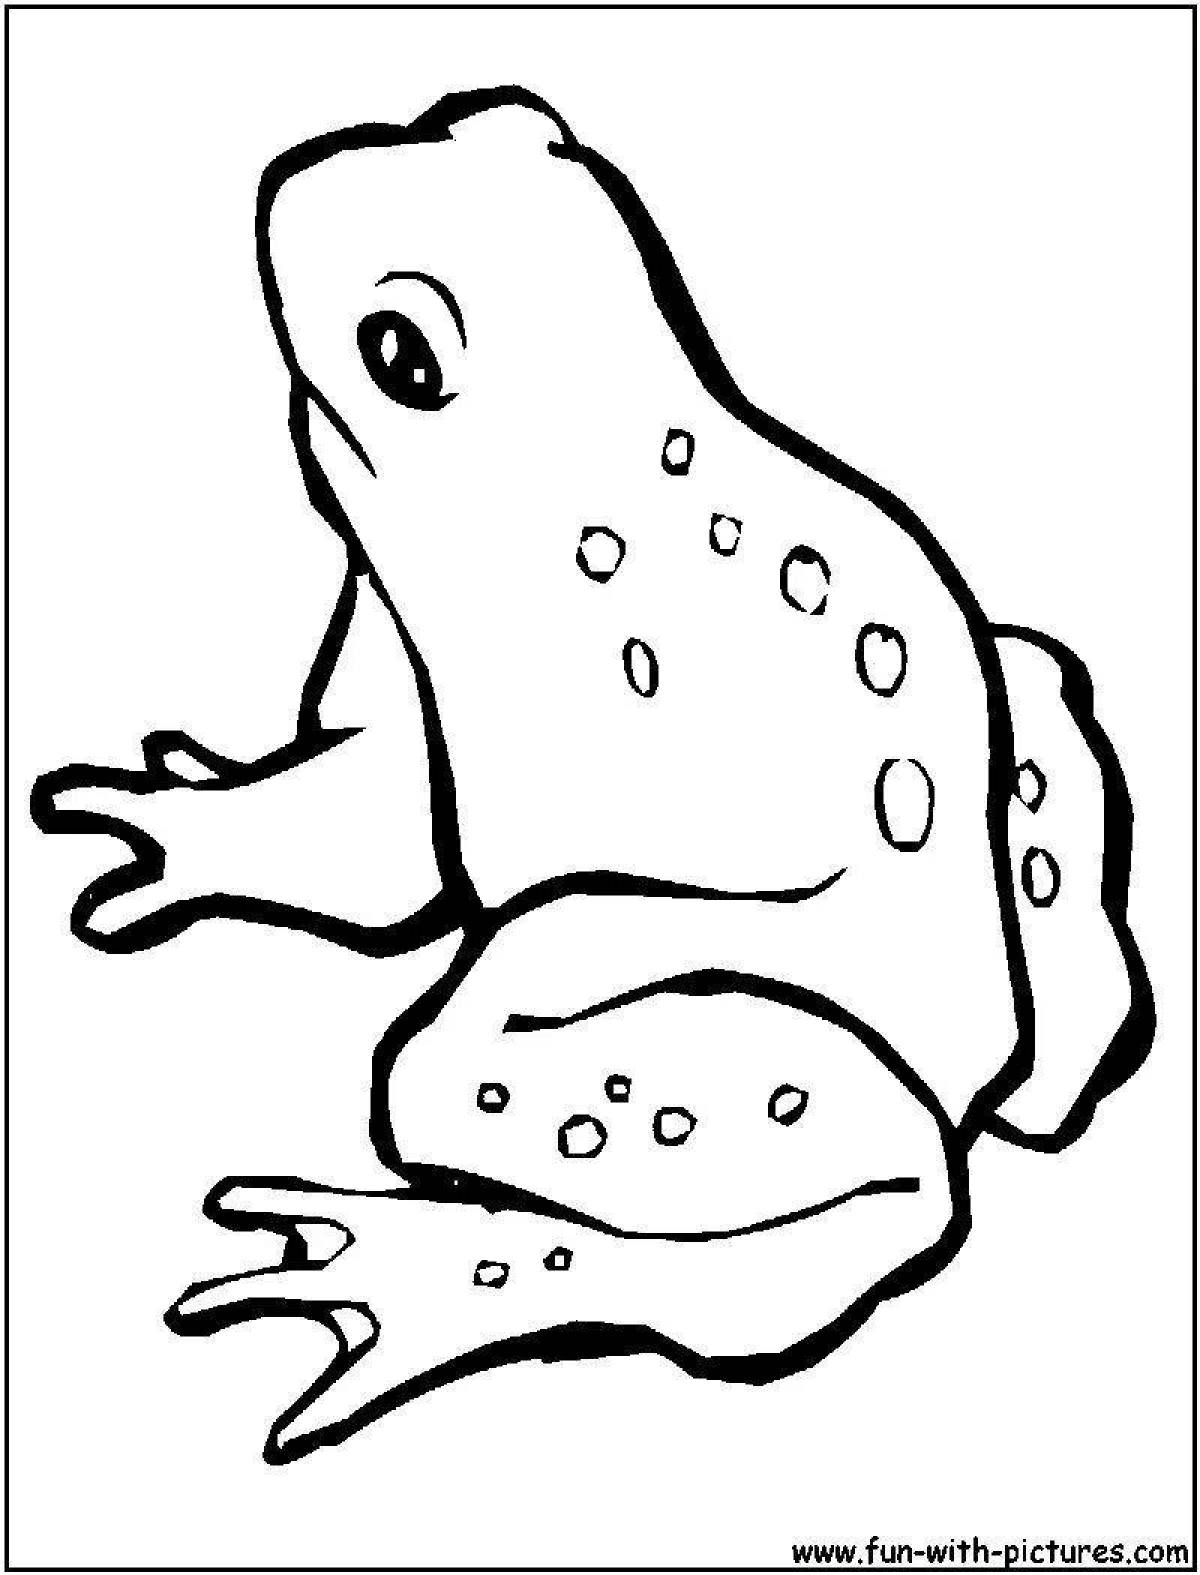 Playful cute frog coloring book